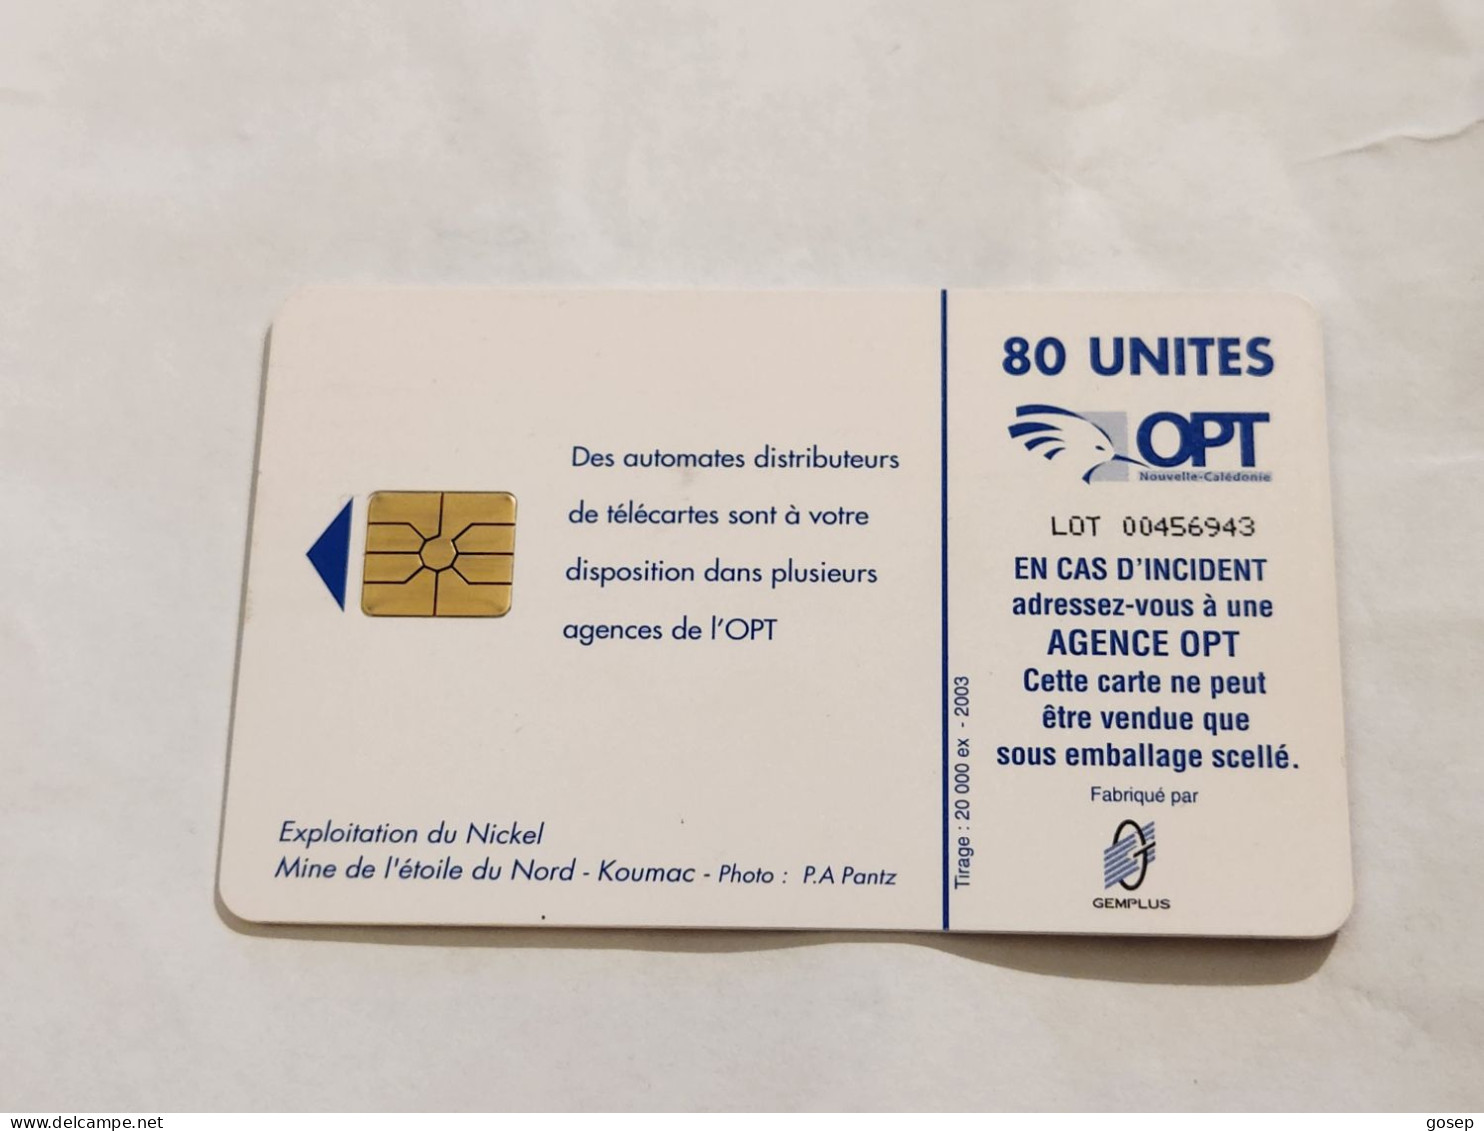 New Caledonia-(NC-OPC-109)-Exploitation Du Nickel-(13)-(80units)(tirage-20.000)-(01/2000)-used Card+1card Prepiad Free - Nouvelle-Calédonie